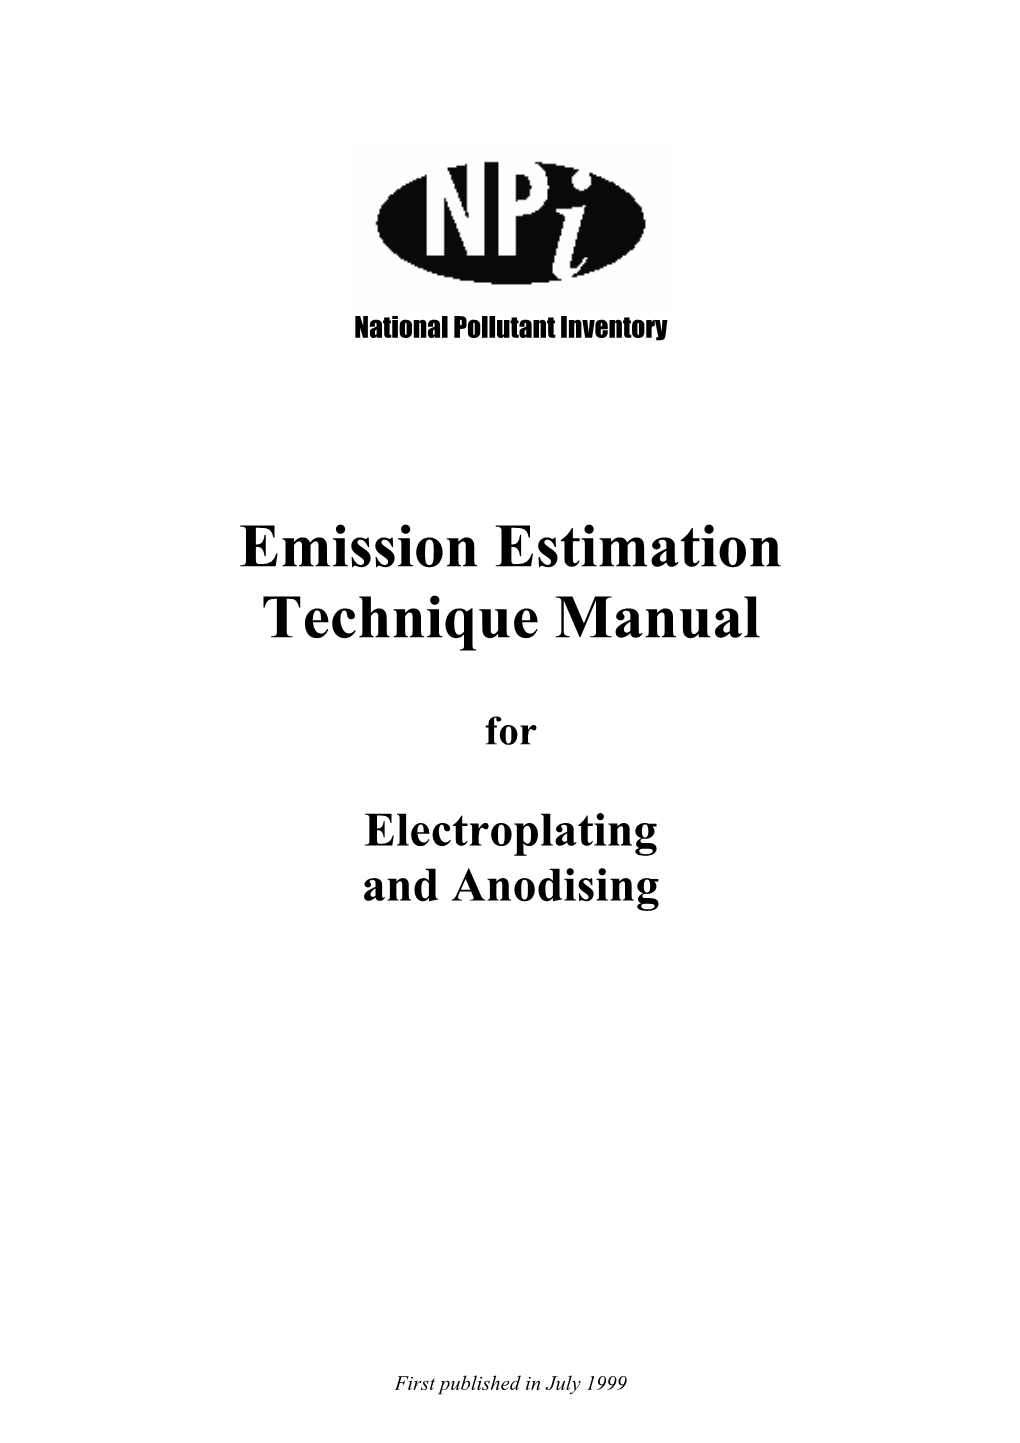 National Pollutant Inventory (NPI) Emission Estimation Technique Manual for Electroplating and Anodising – July 1999